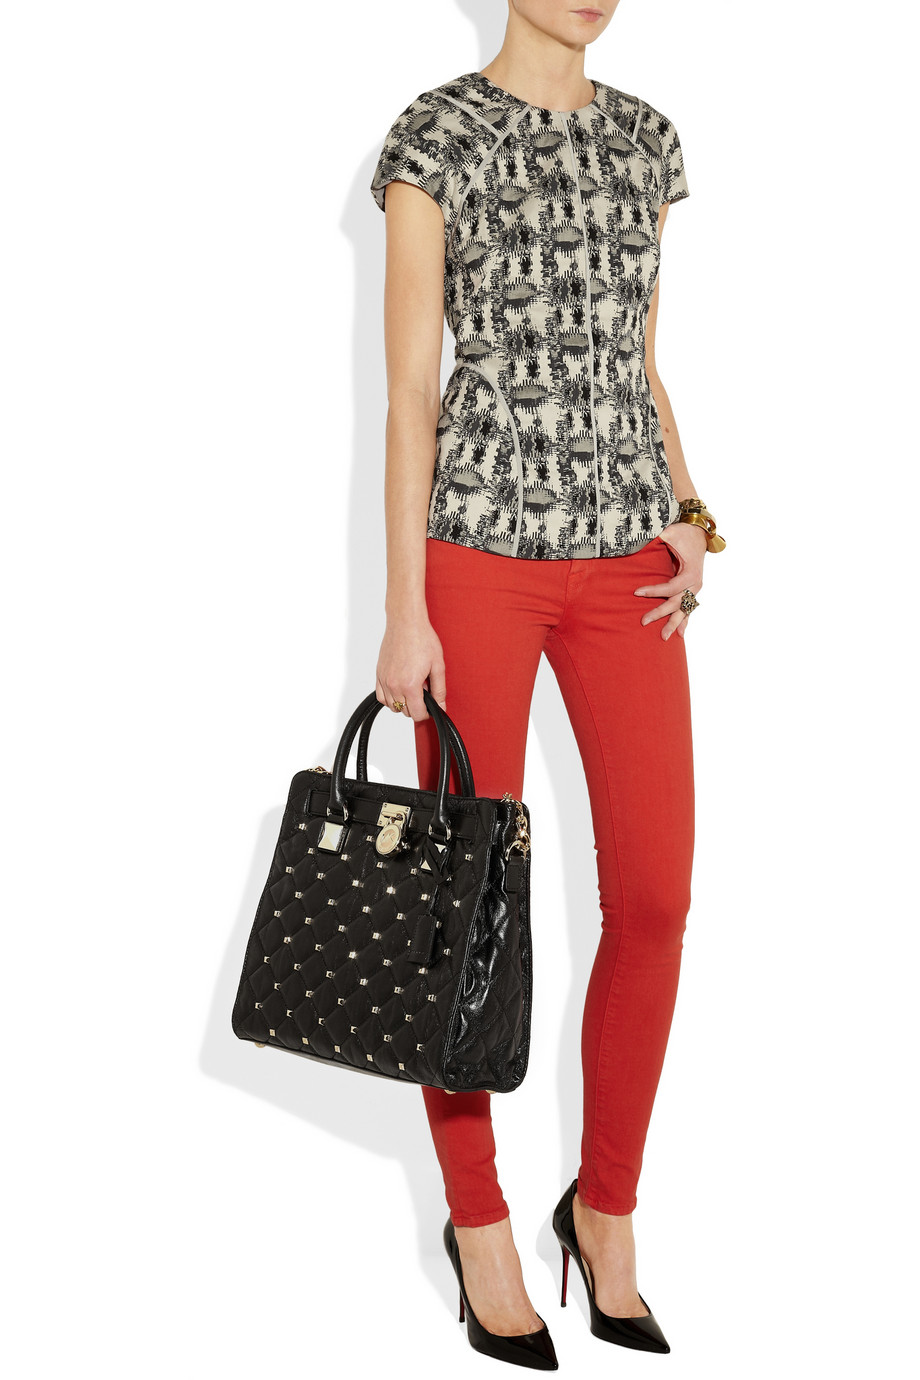 MICHAEL Michael Kors Hamilton Studded Quilted Leather Tote in Black | Lyst